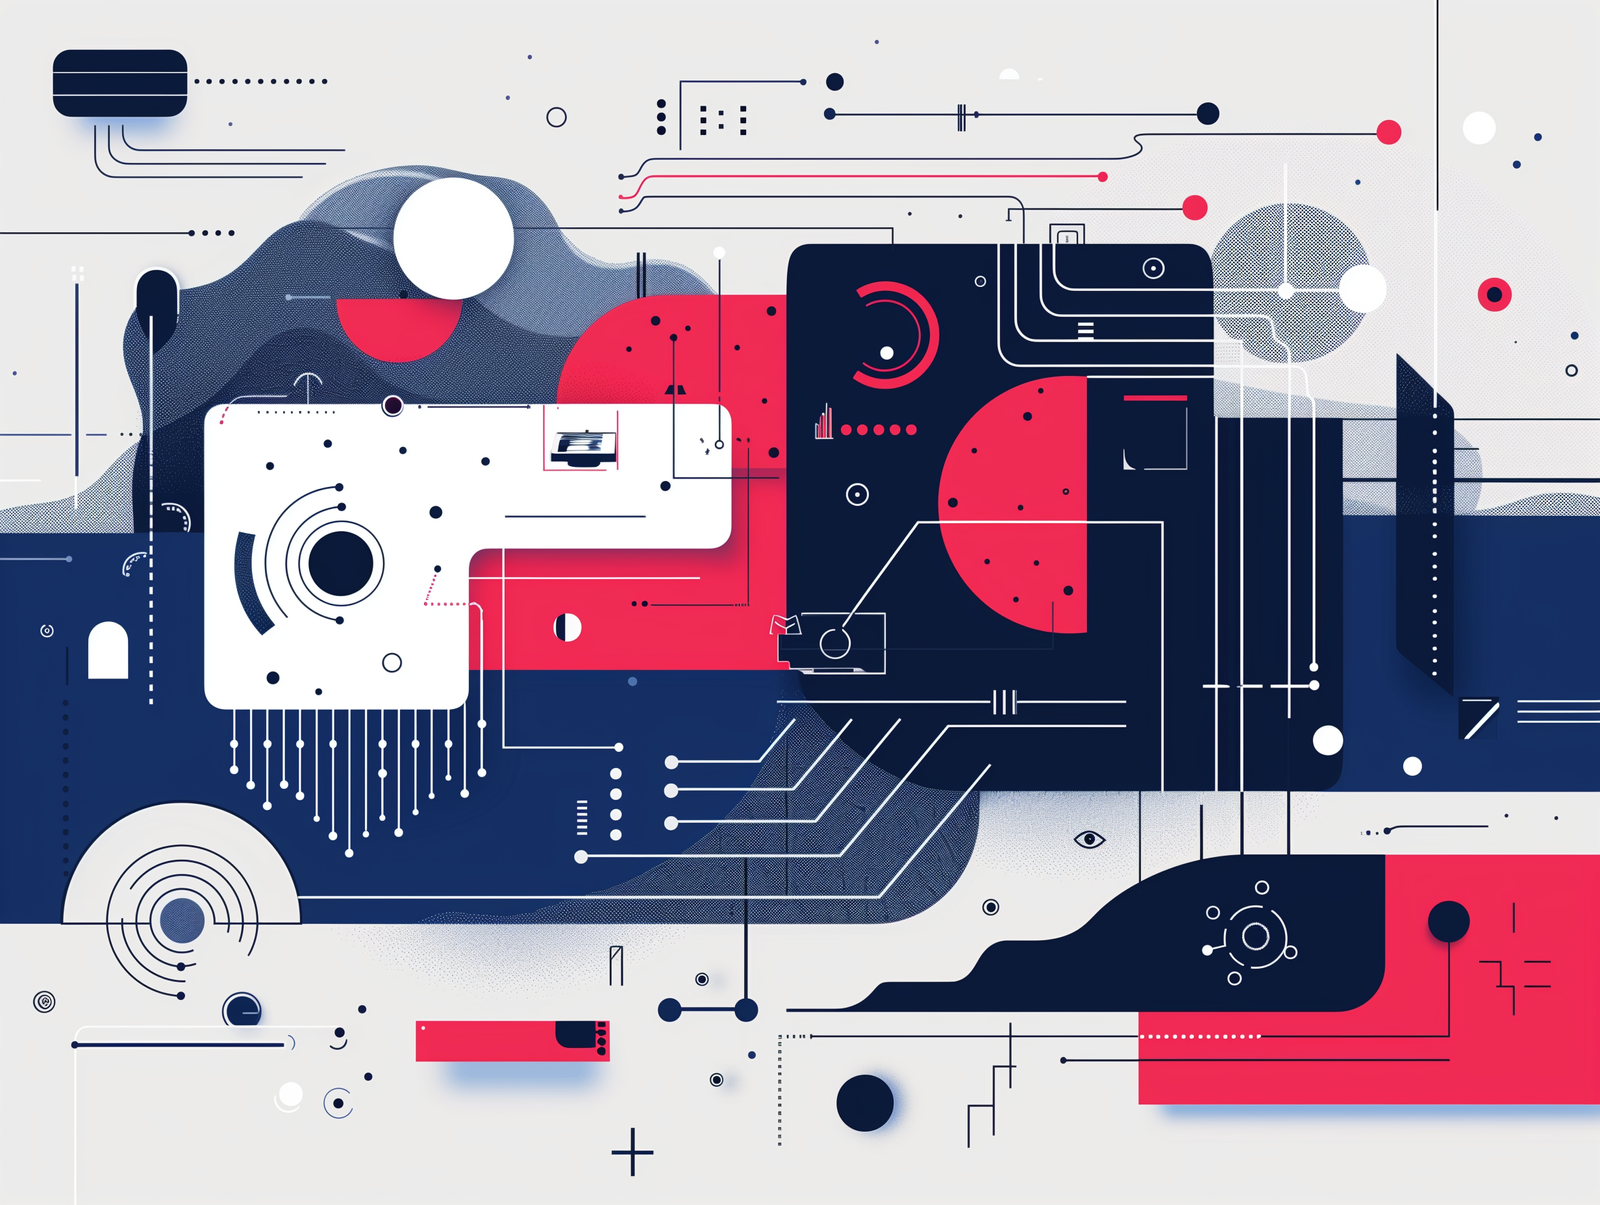 The image is an abstract digital illustration featuring a variety of geometric shapes, lines, and circuit-like elements in shades of blue, red, white, and gray. The composition consists of interlocking forms reminiscent of futuristic technology or computer components. The overall design has a modern, industrial aesthetic with a sense of complexity and interconnectedness. While abstract, the illustration suggests themes related to technology, networks, or design systems.